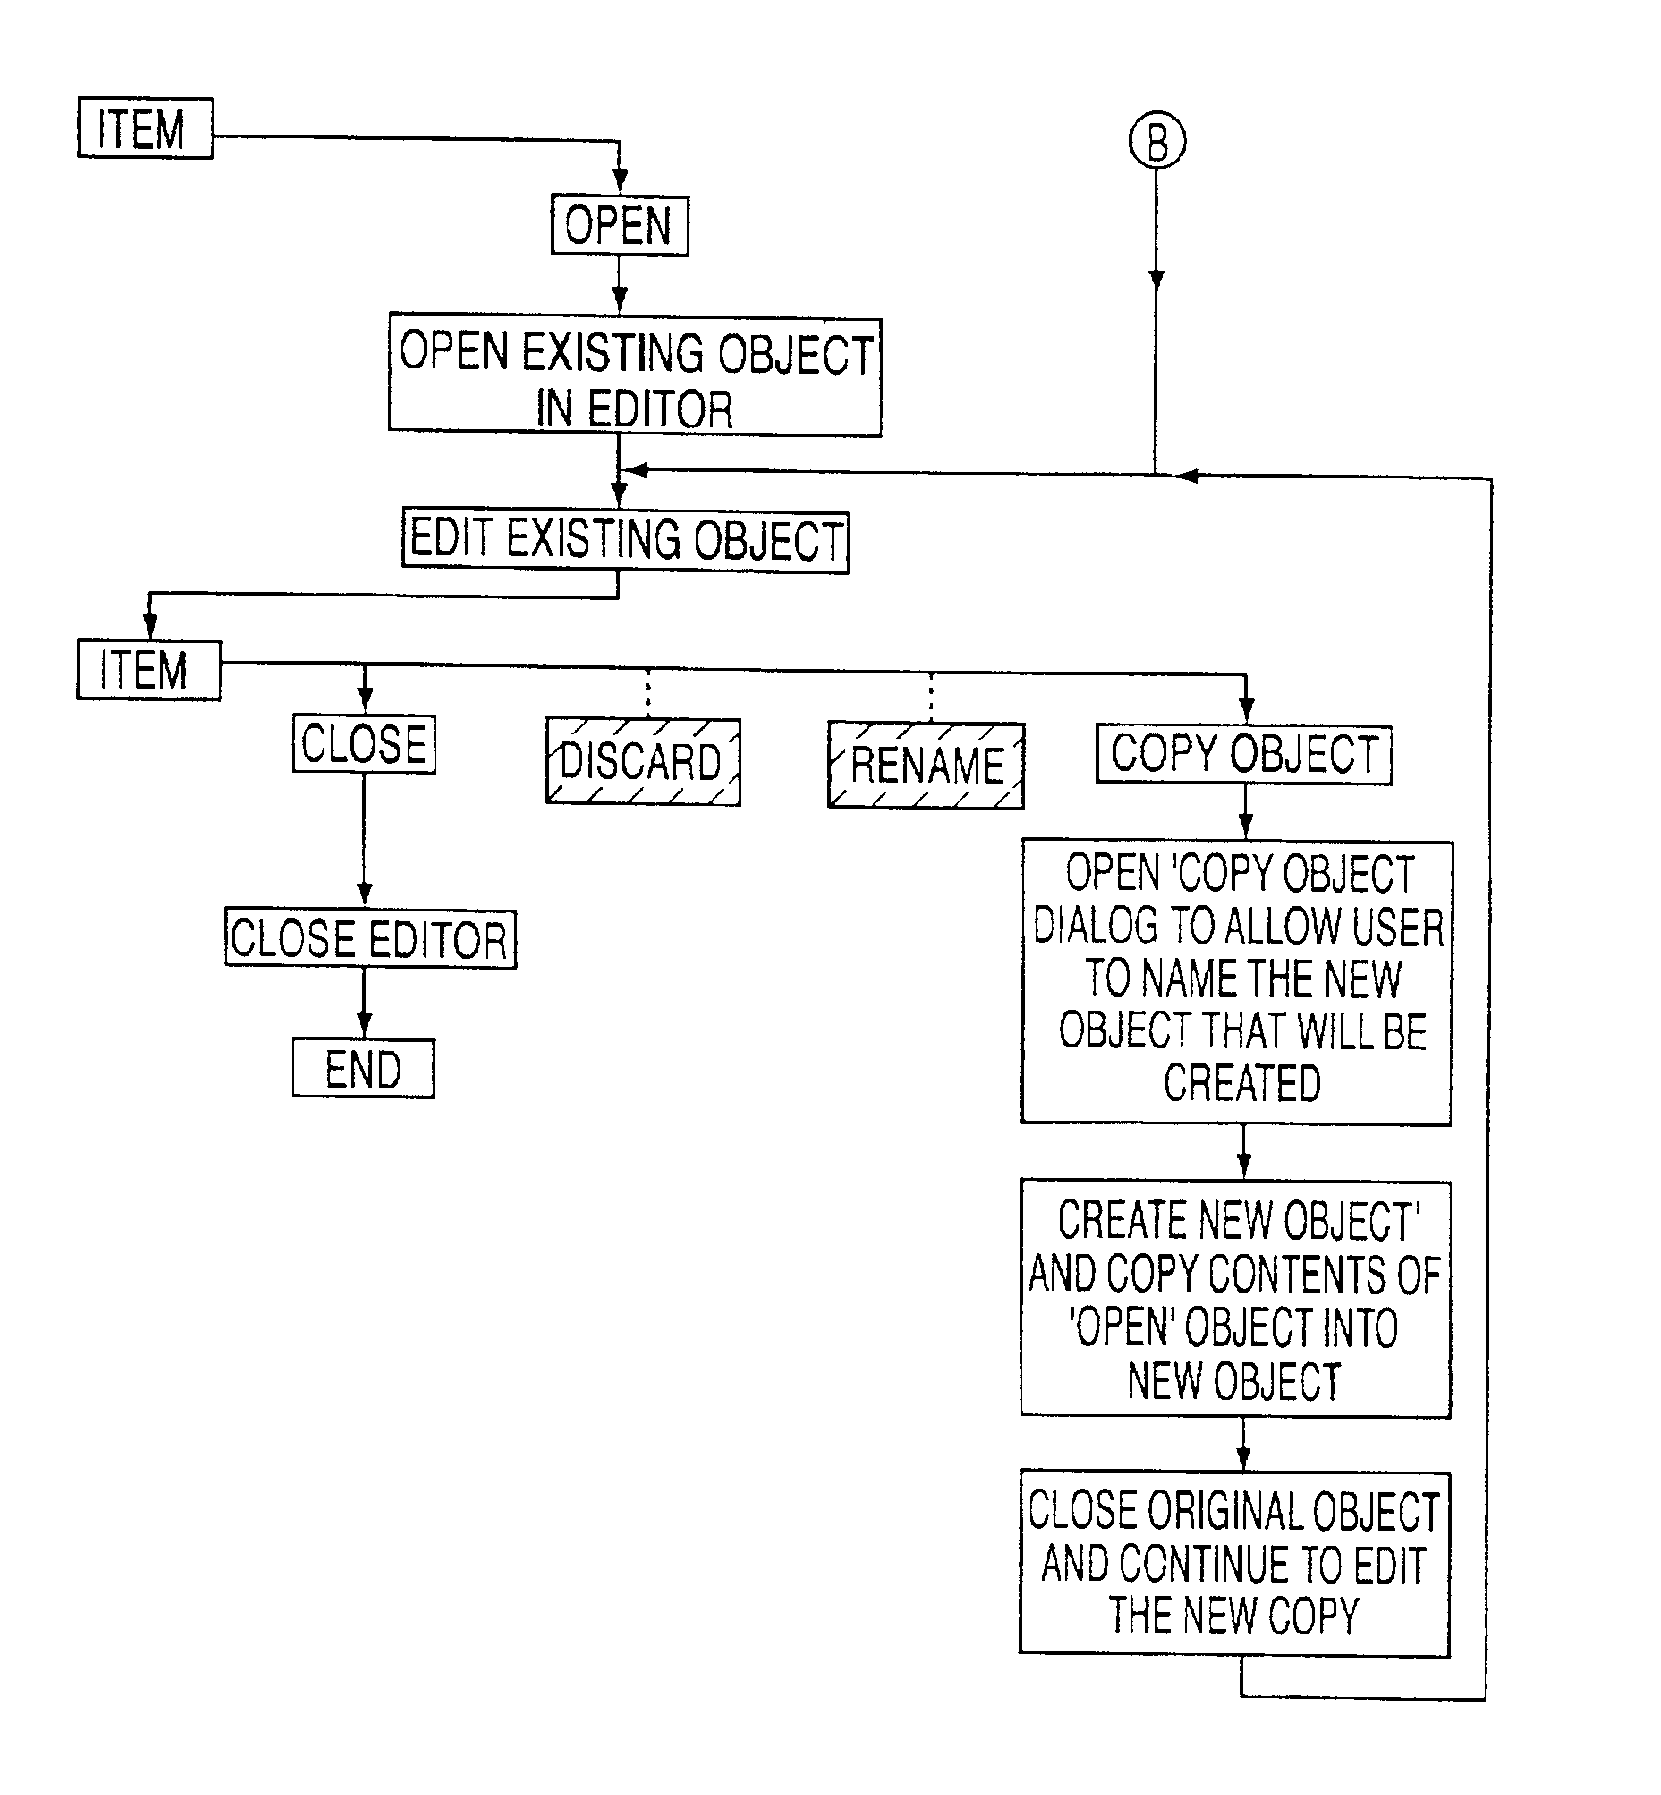 Electronics assembly engineering system employing naming and manipulation functions for user defined data structures in a data system using transaction service